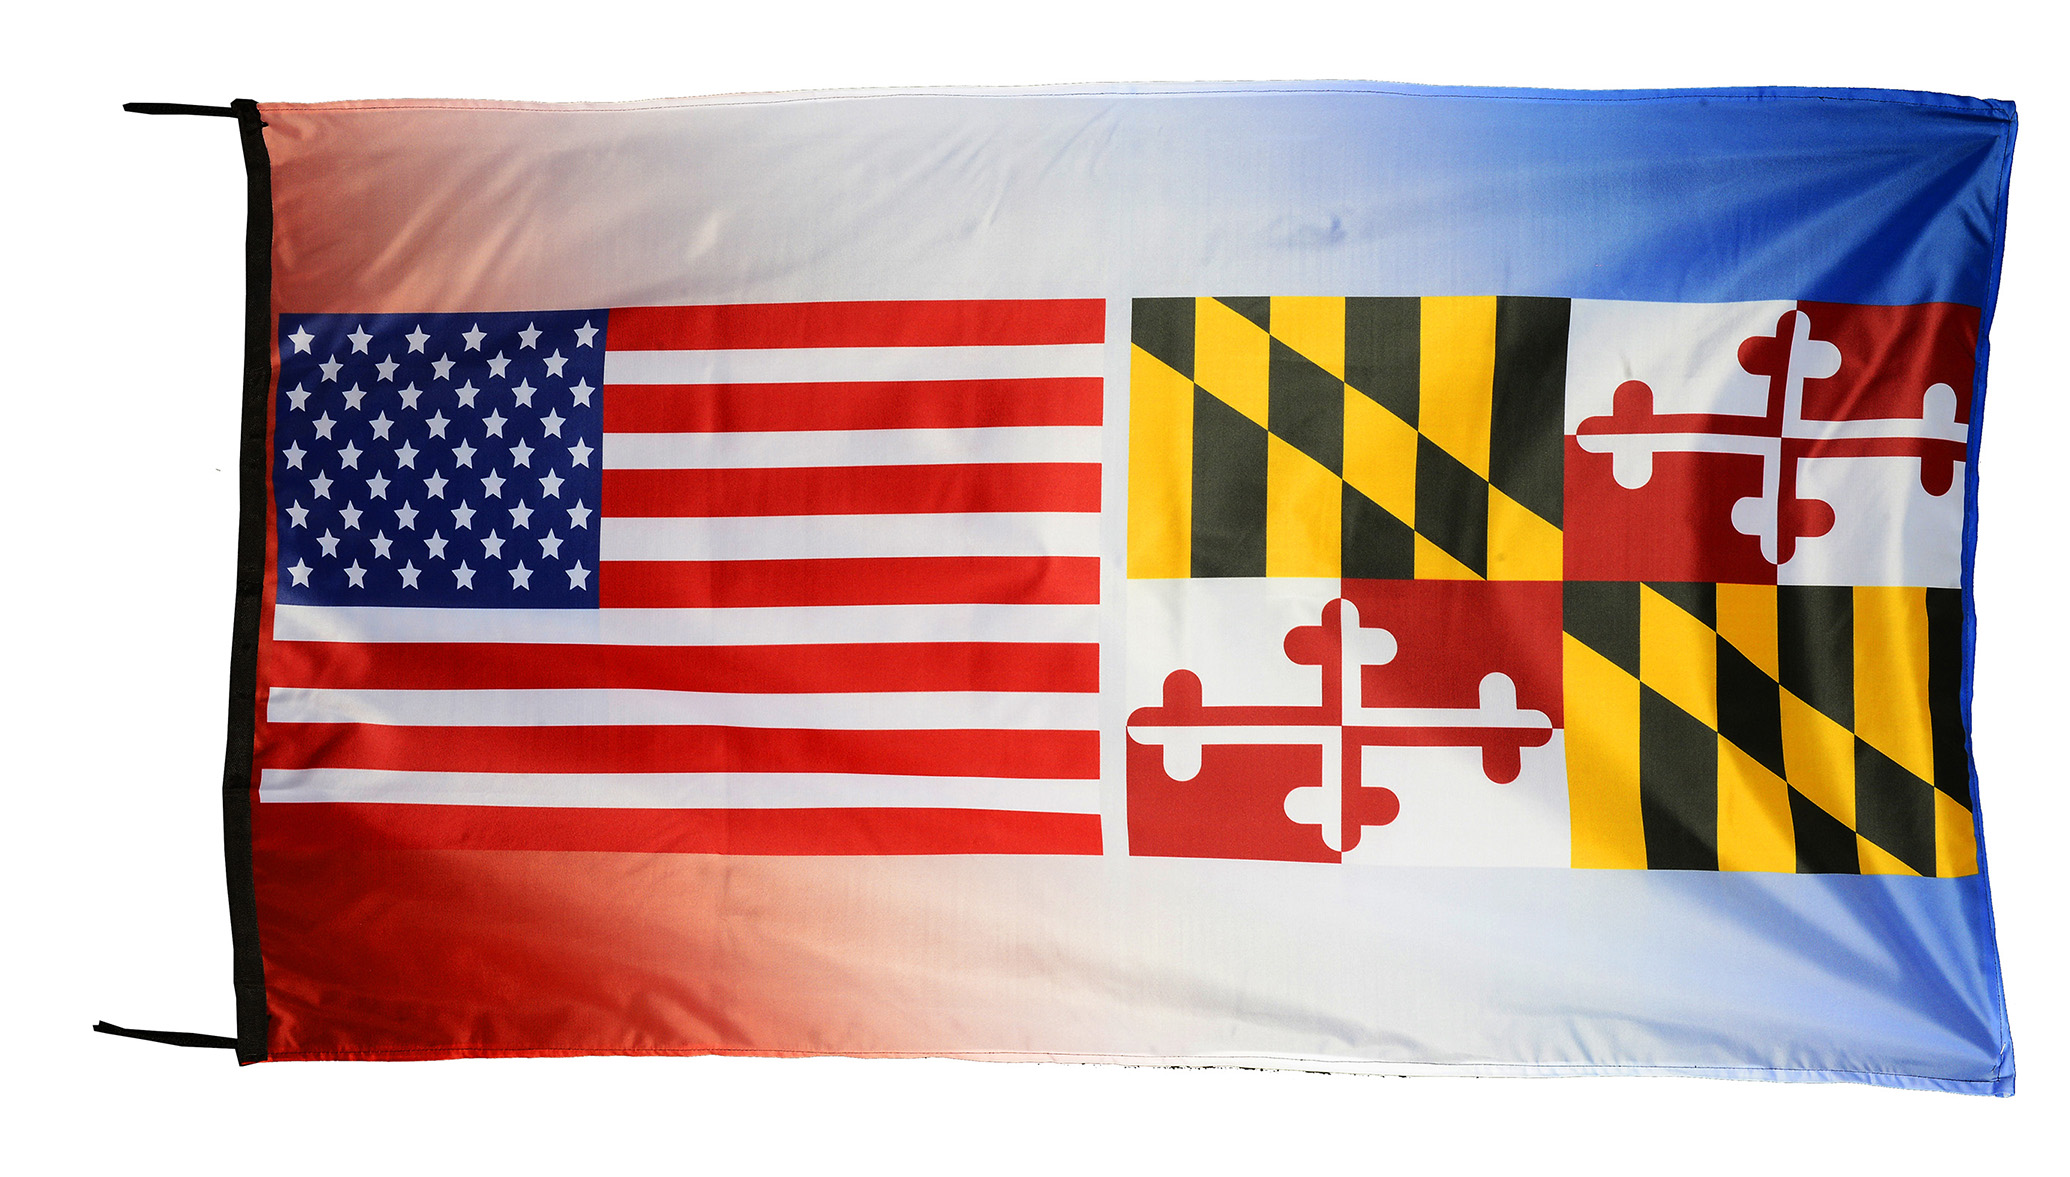 Flag  094 USA / US Country / United States Of America and Louisiana / Patriotic / Pride Hybrid Weather-Resistant Polyester Outdoor Flag Landscape Banner / Vivid Colors / 3 X 5 FT (150 x 90cm) International Flags for Sale